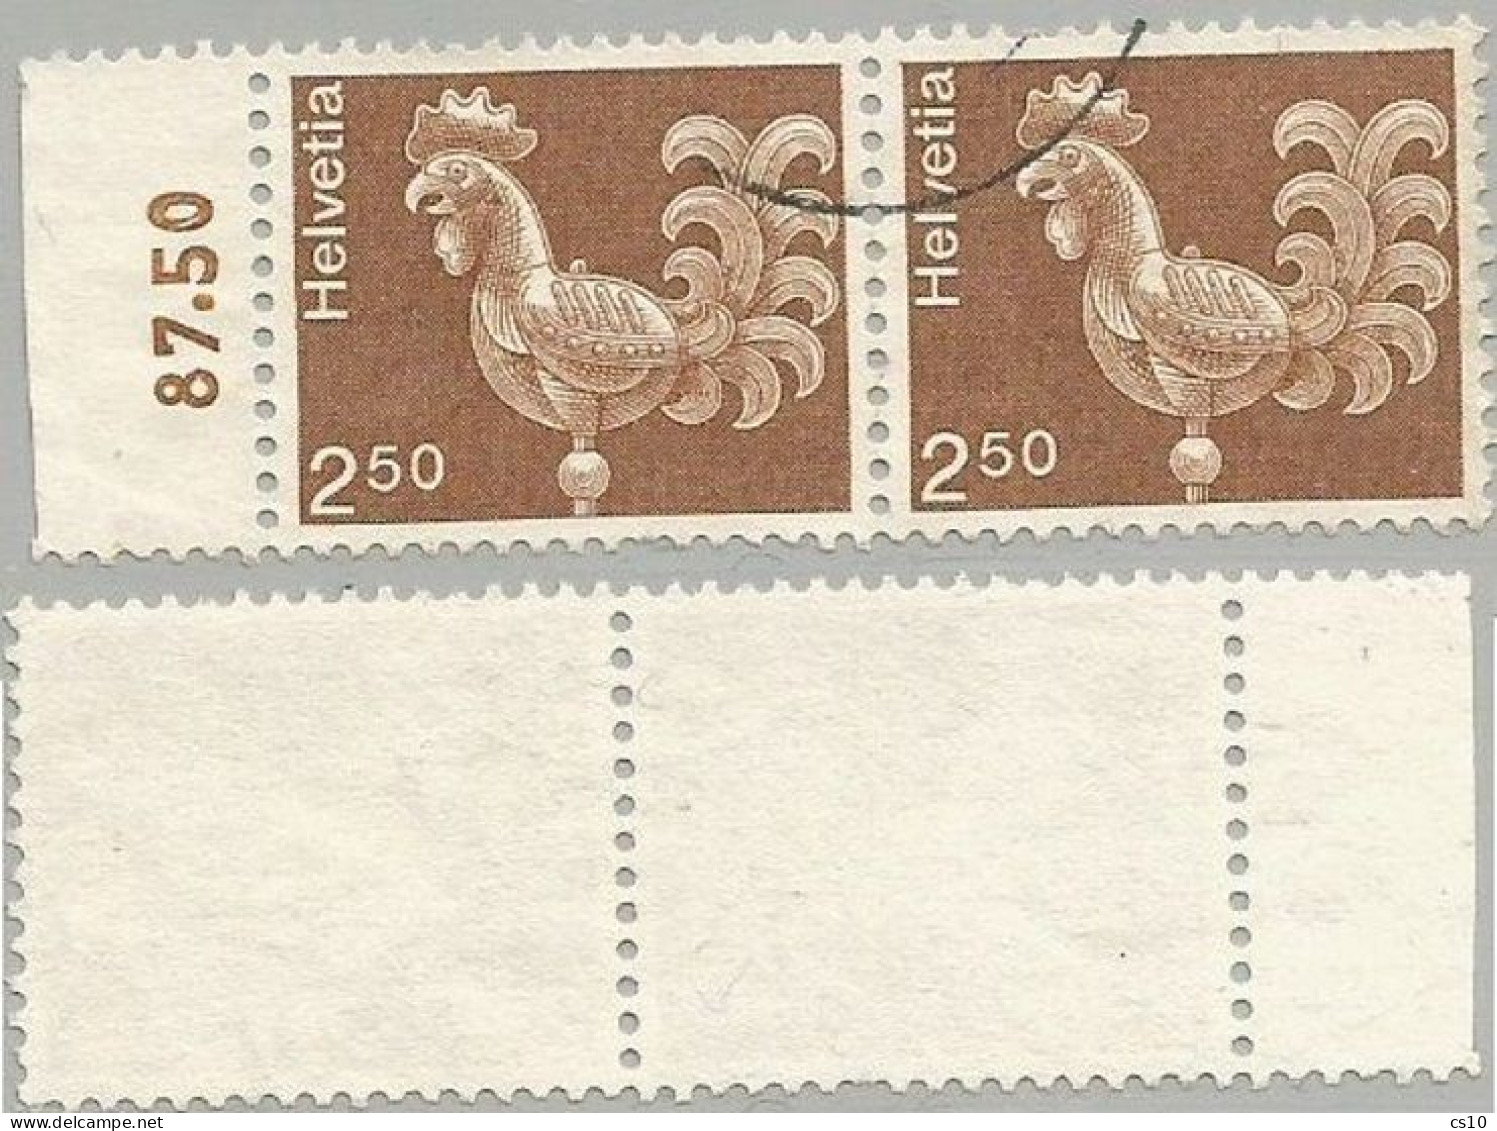 Suisse 1975 Artworks Wheatercock FS.2,50 - Scarce Variety NON FLUO PAPER - #2 Pcs In Horiz. Pair With Sheet Margin - Marcofilie